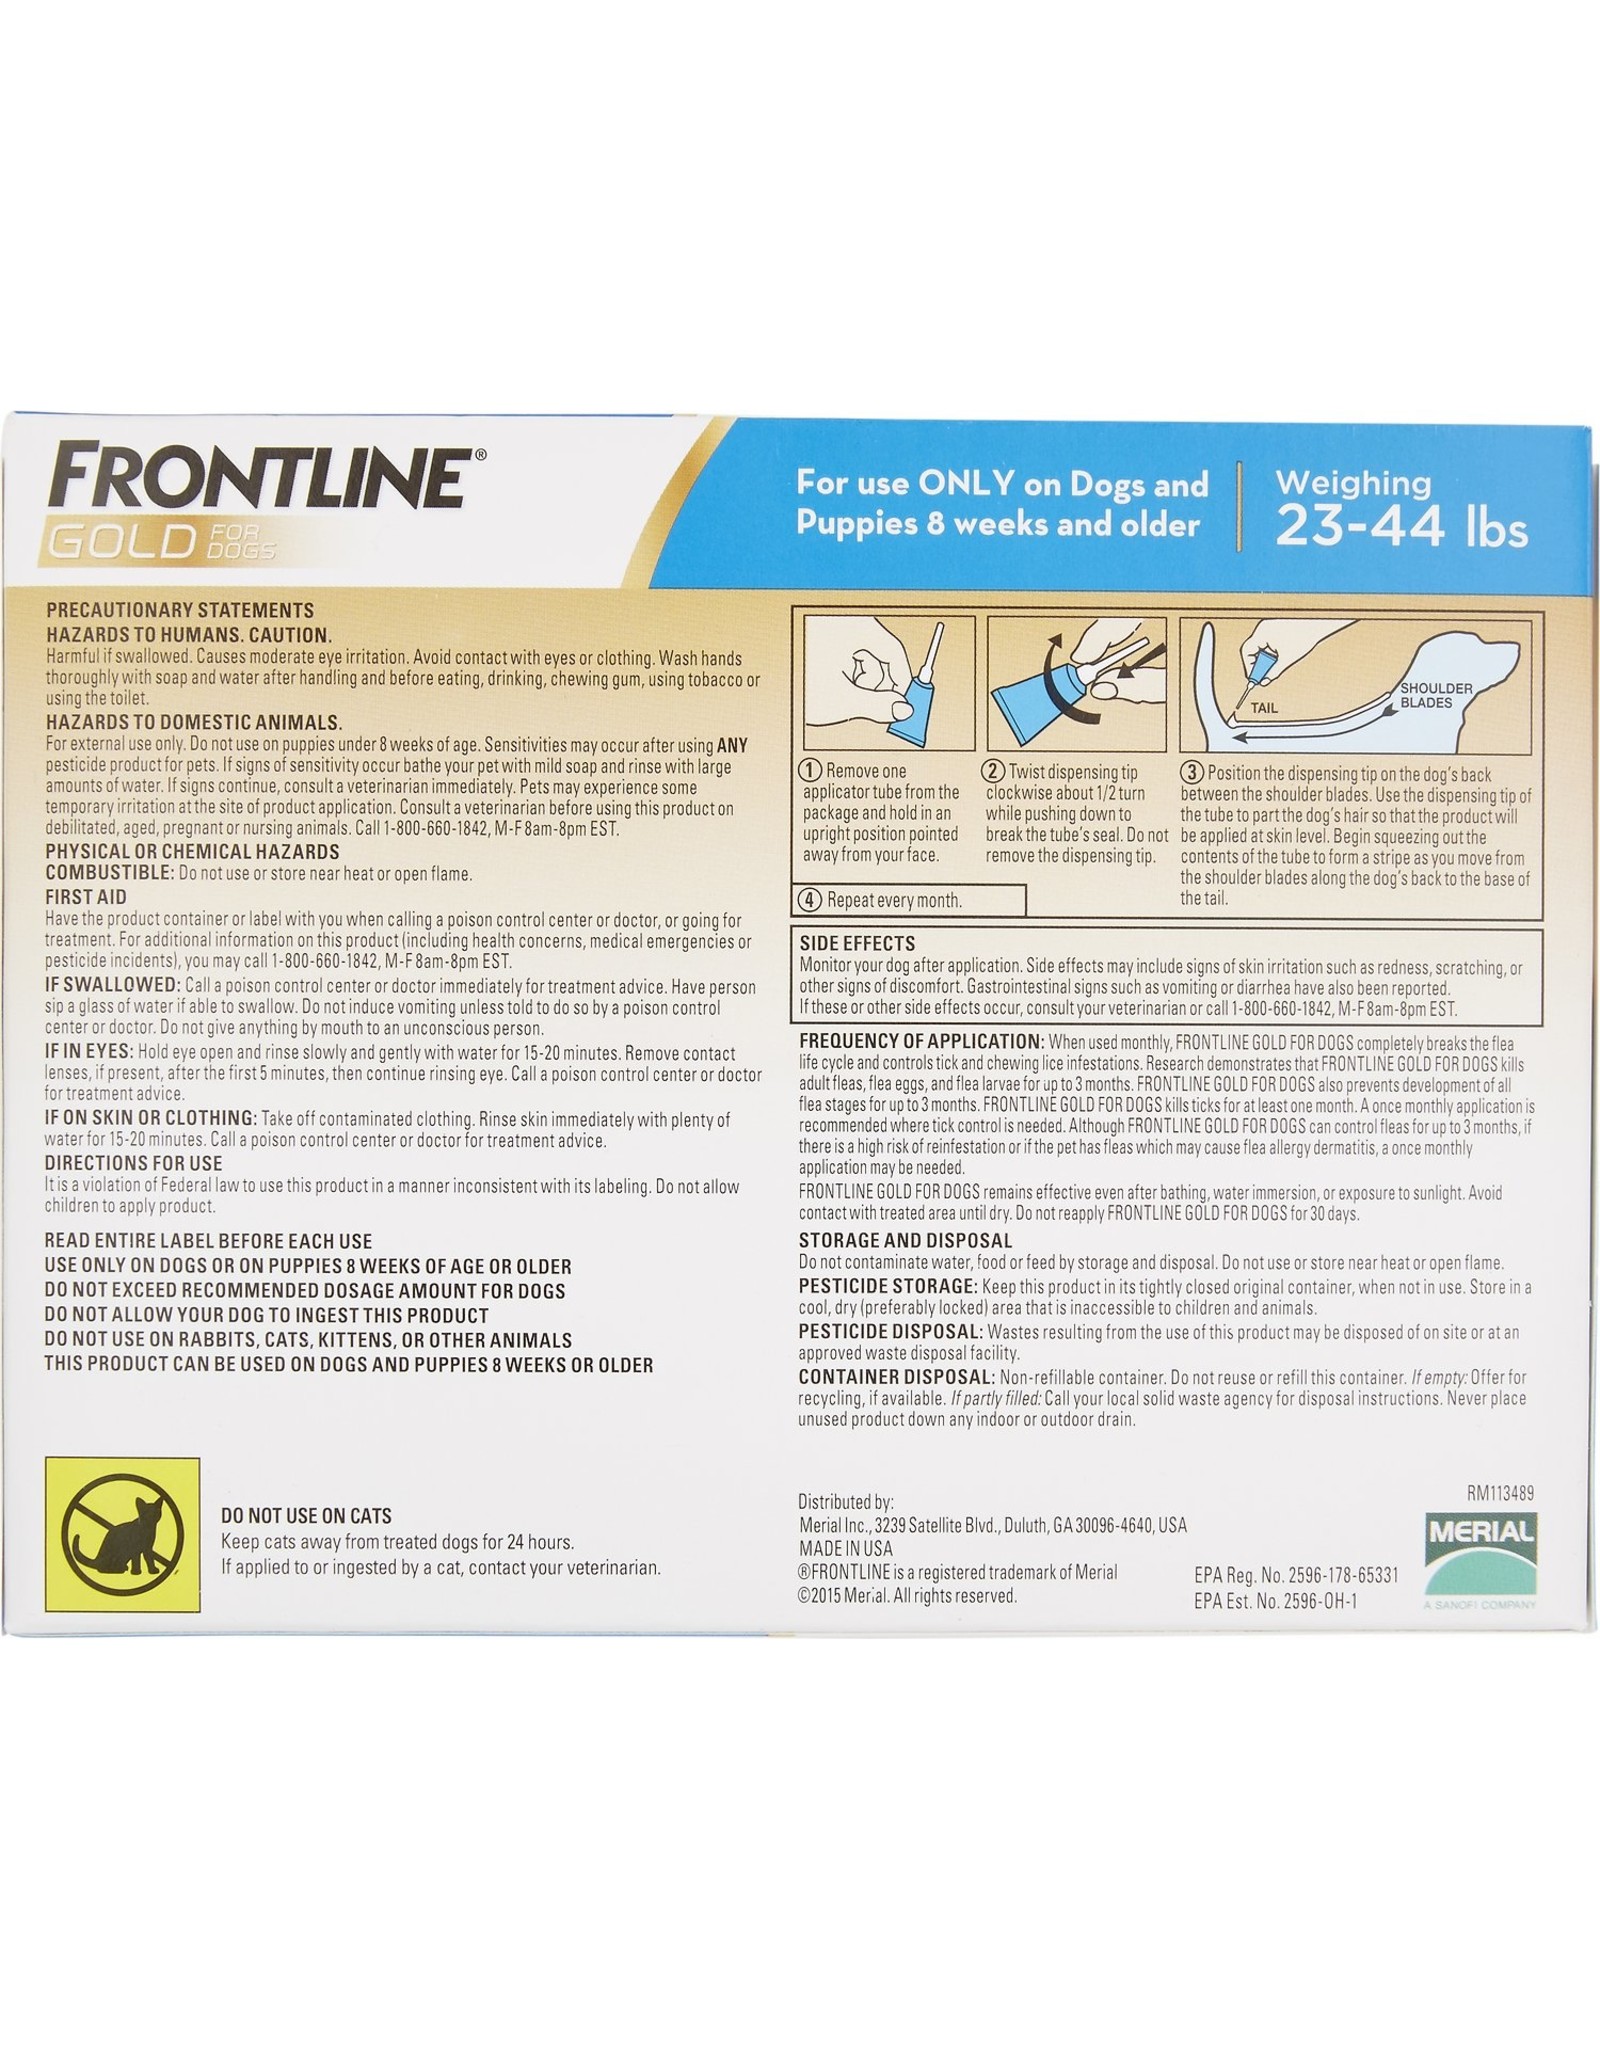 Frontline FRONTLINE  FOR DOGS FLEA & TICK TOPICAL SOLUTION 3 DOSES